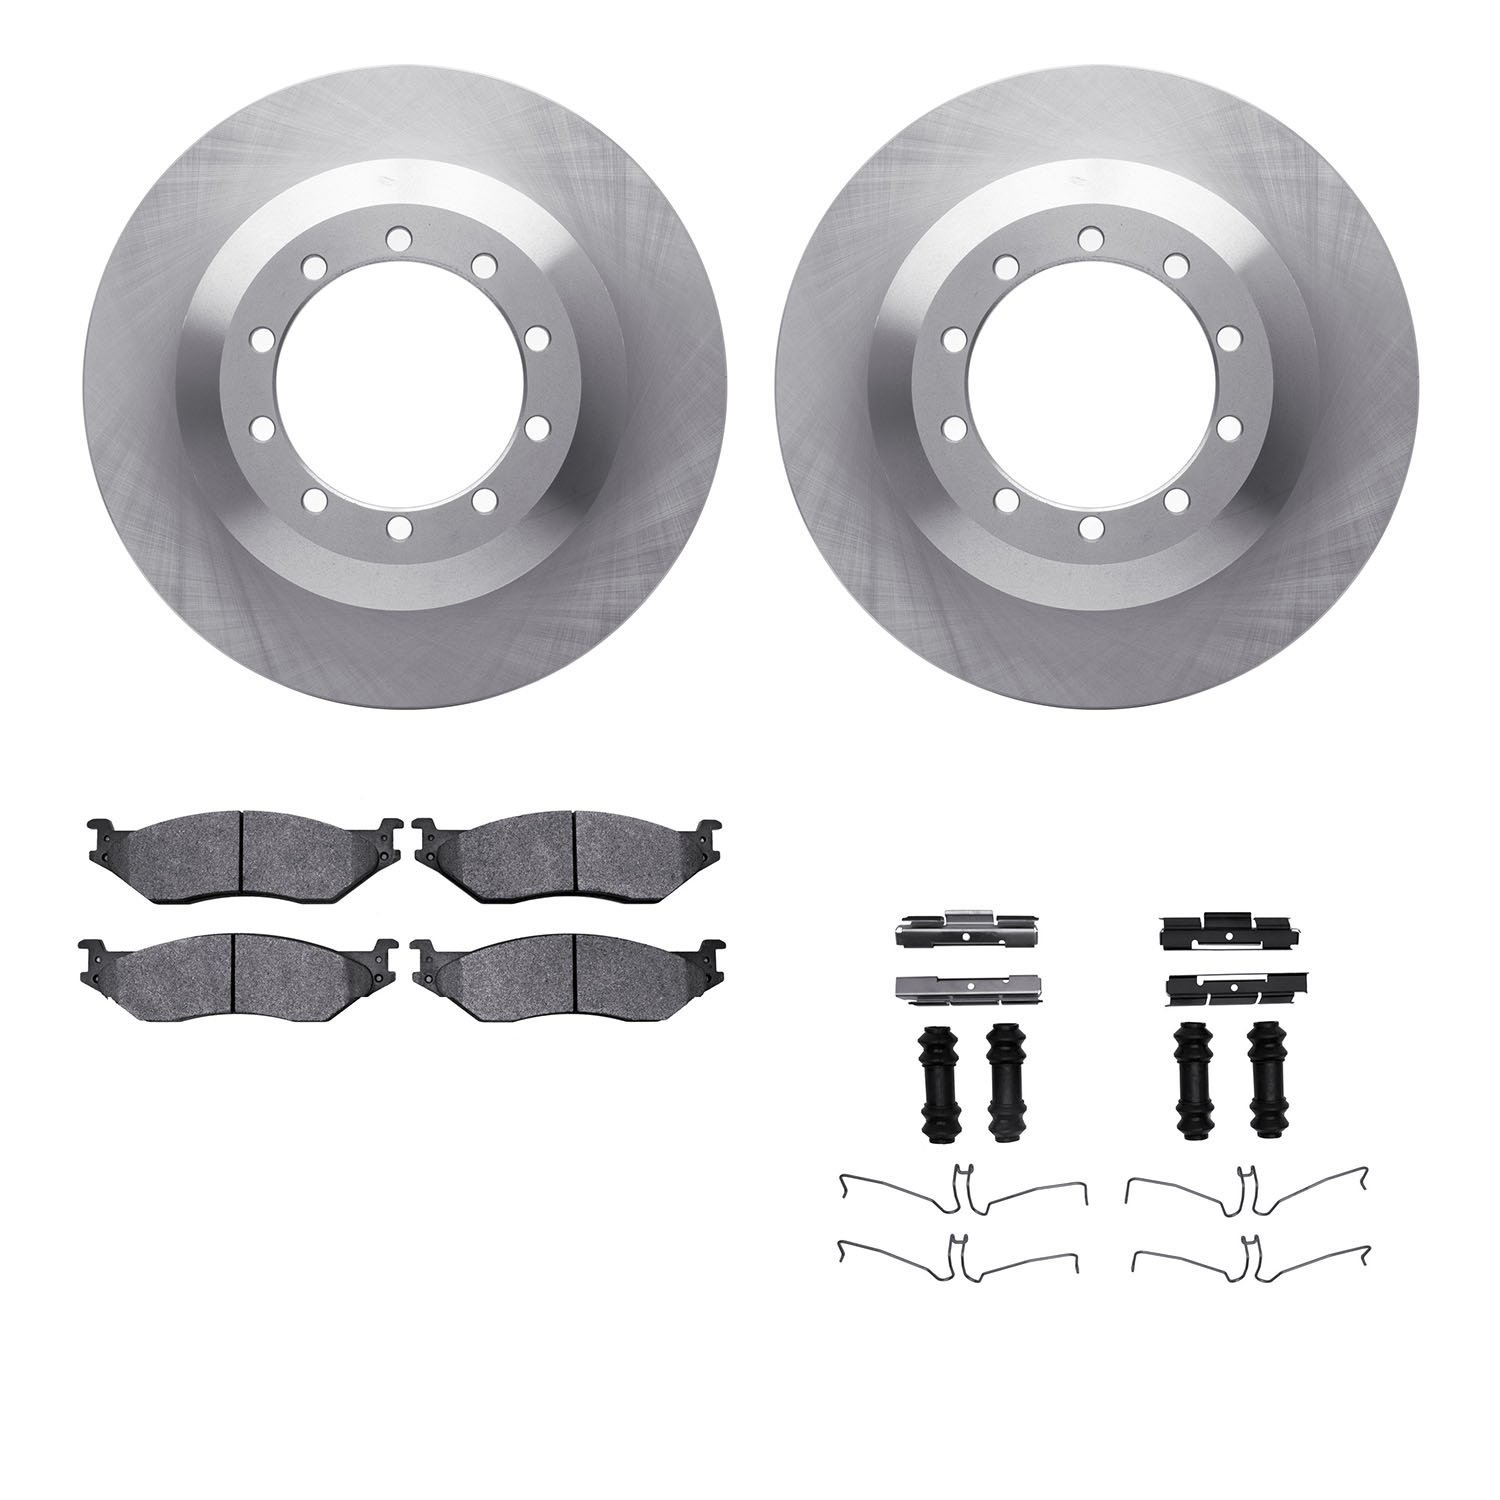 6412-54201 Brake Rotors with Ultimate-Duty Brake Pads Kit & Hardware, 2011-2015 Ford/Lincoln/Mercury/Mazda, Position: Rear